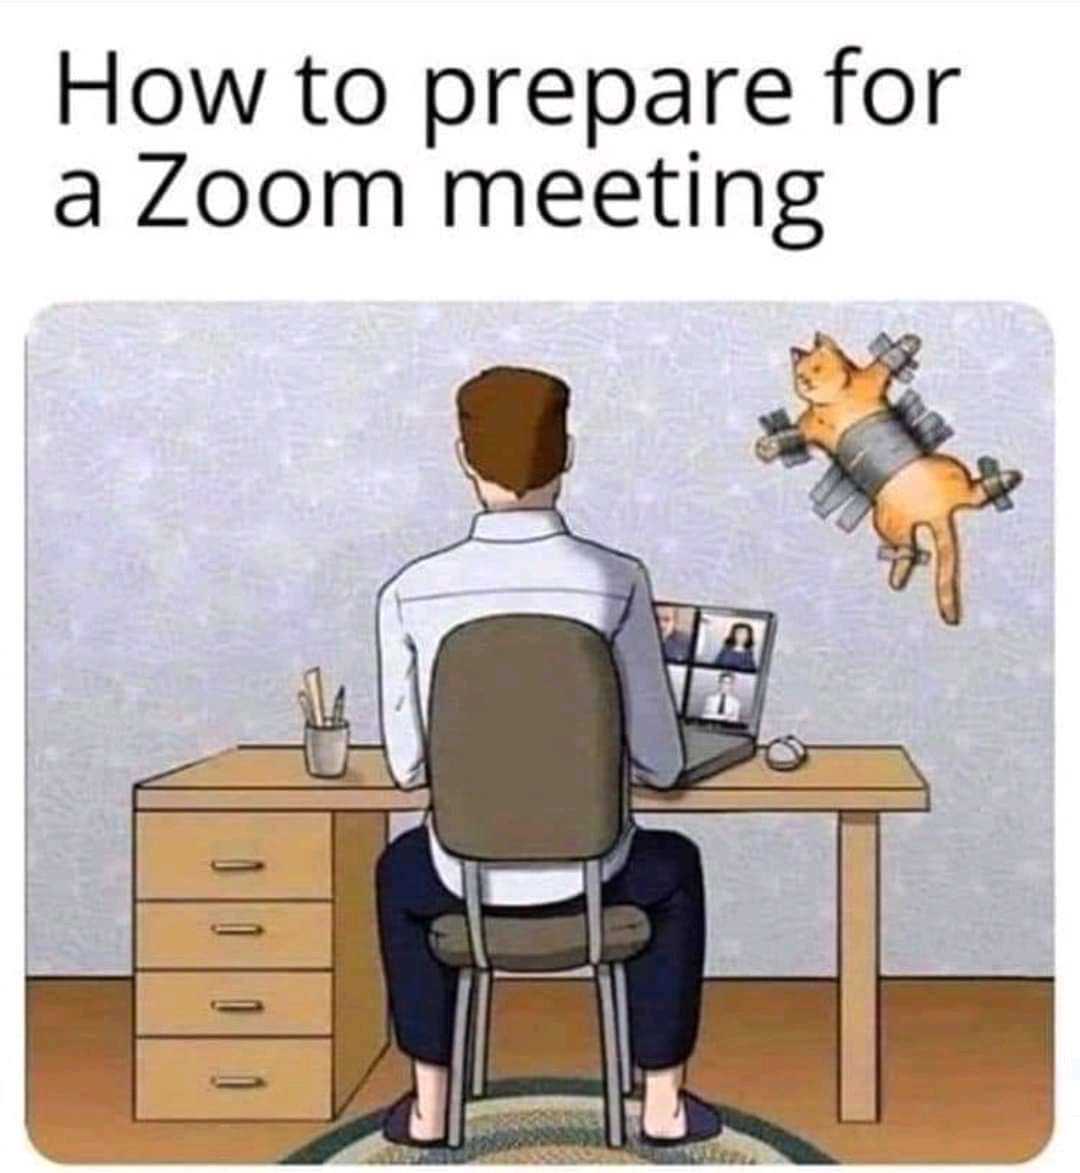 How to prepare for Zoom meeting